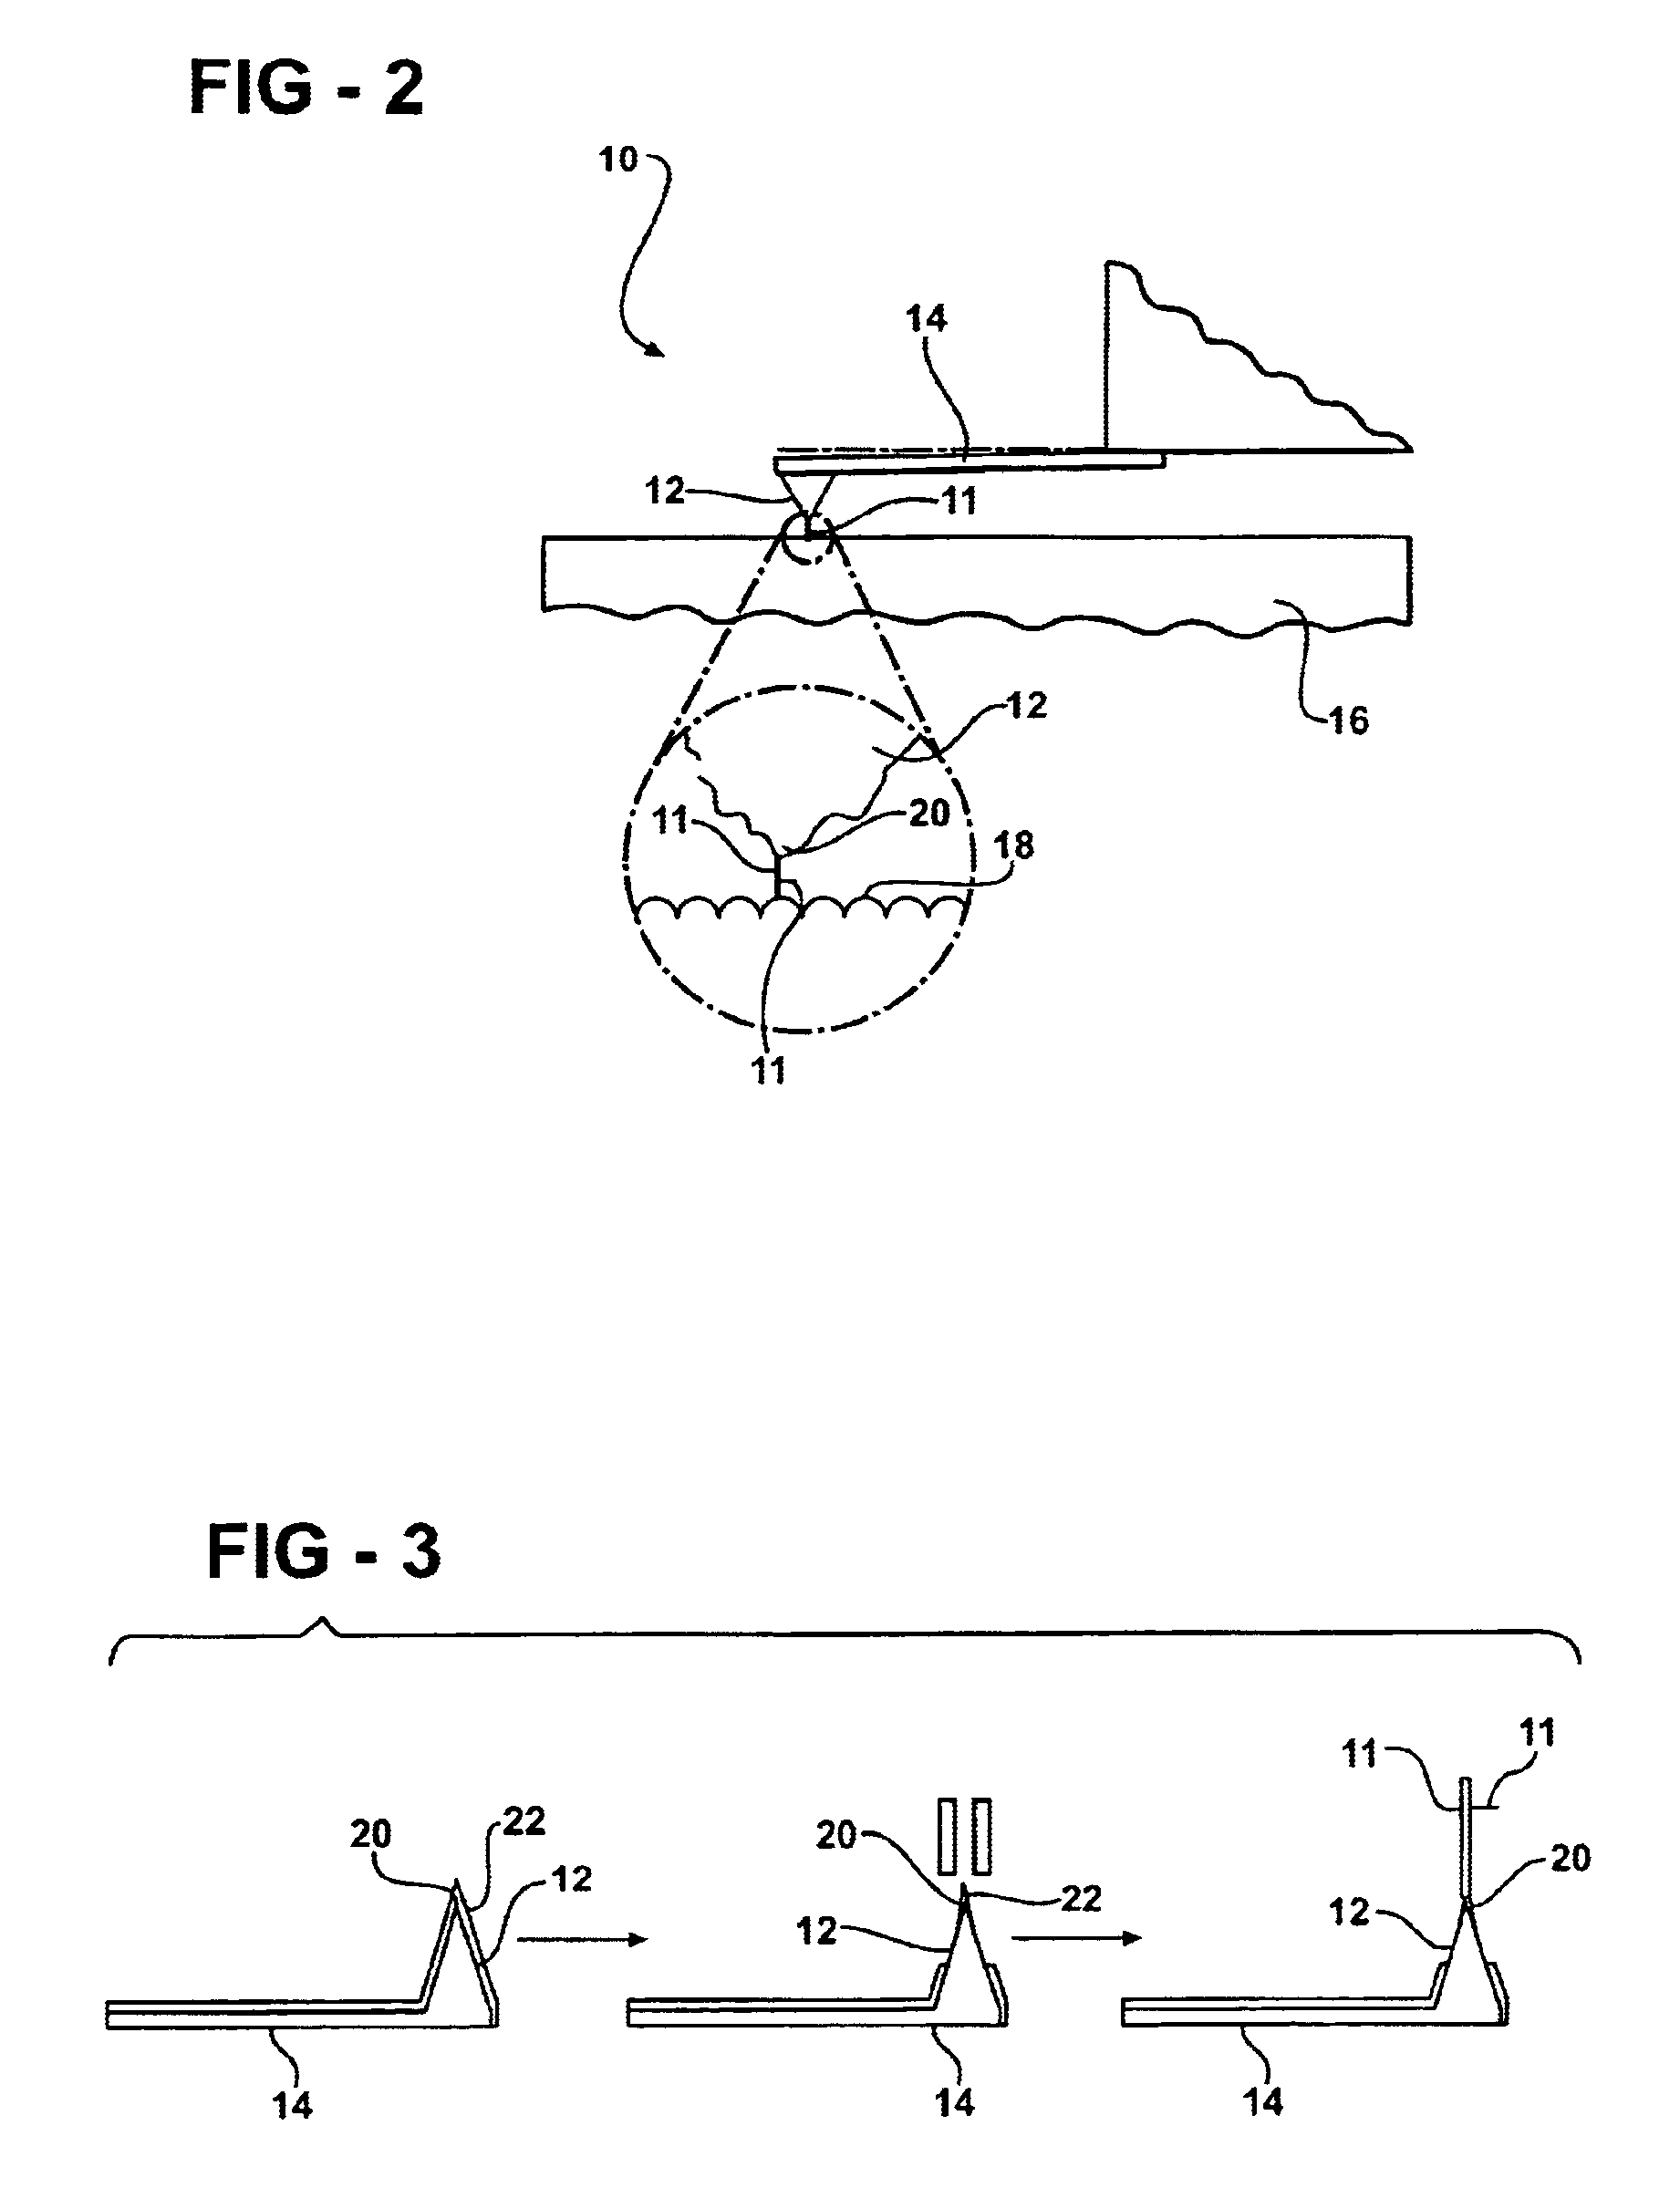 Method of producing a branched carbon nanotube for use with an atomic force microscope